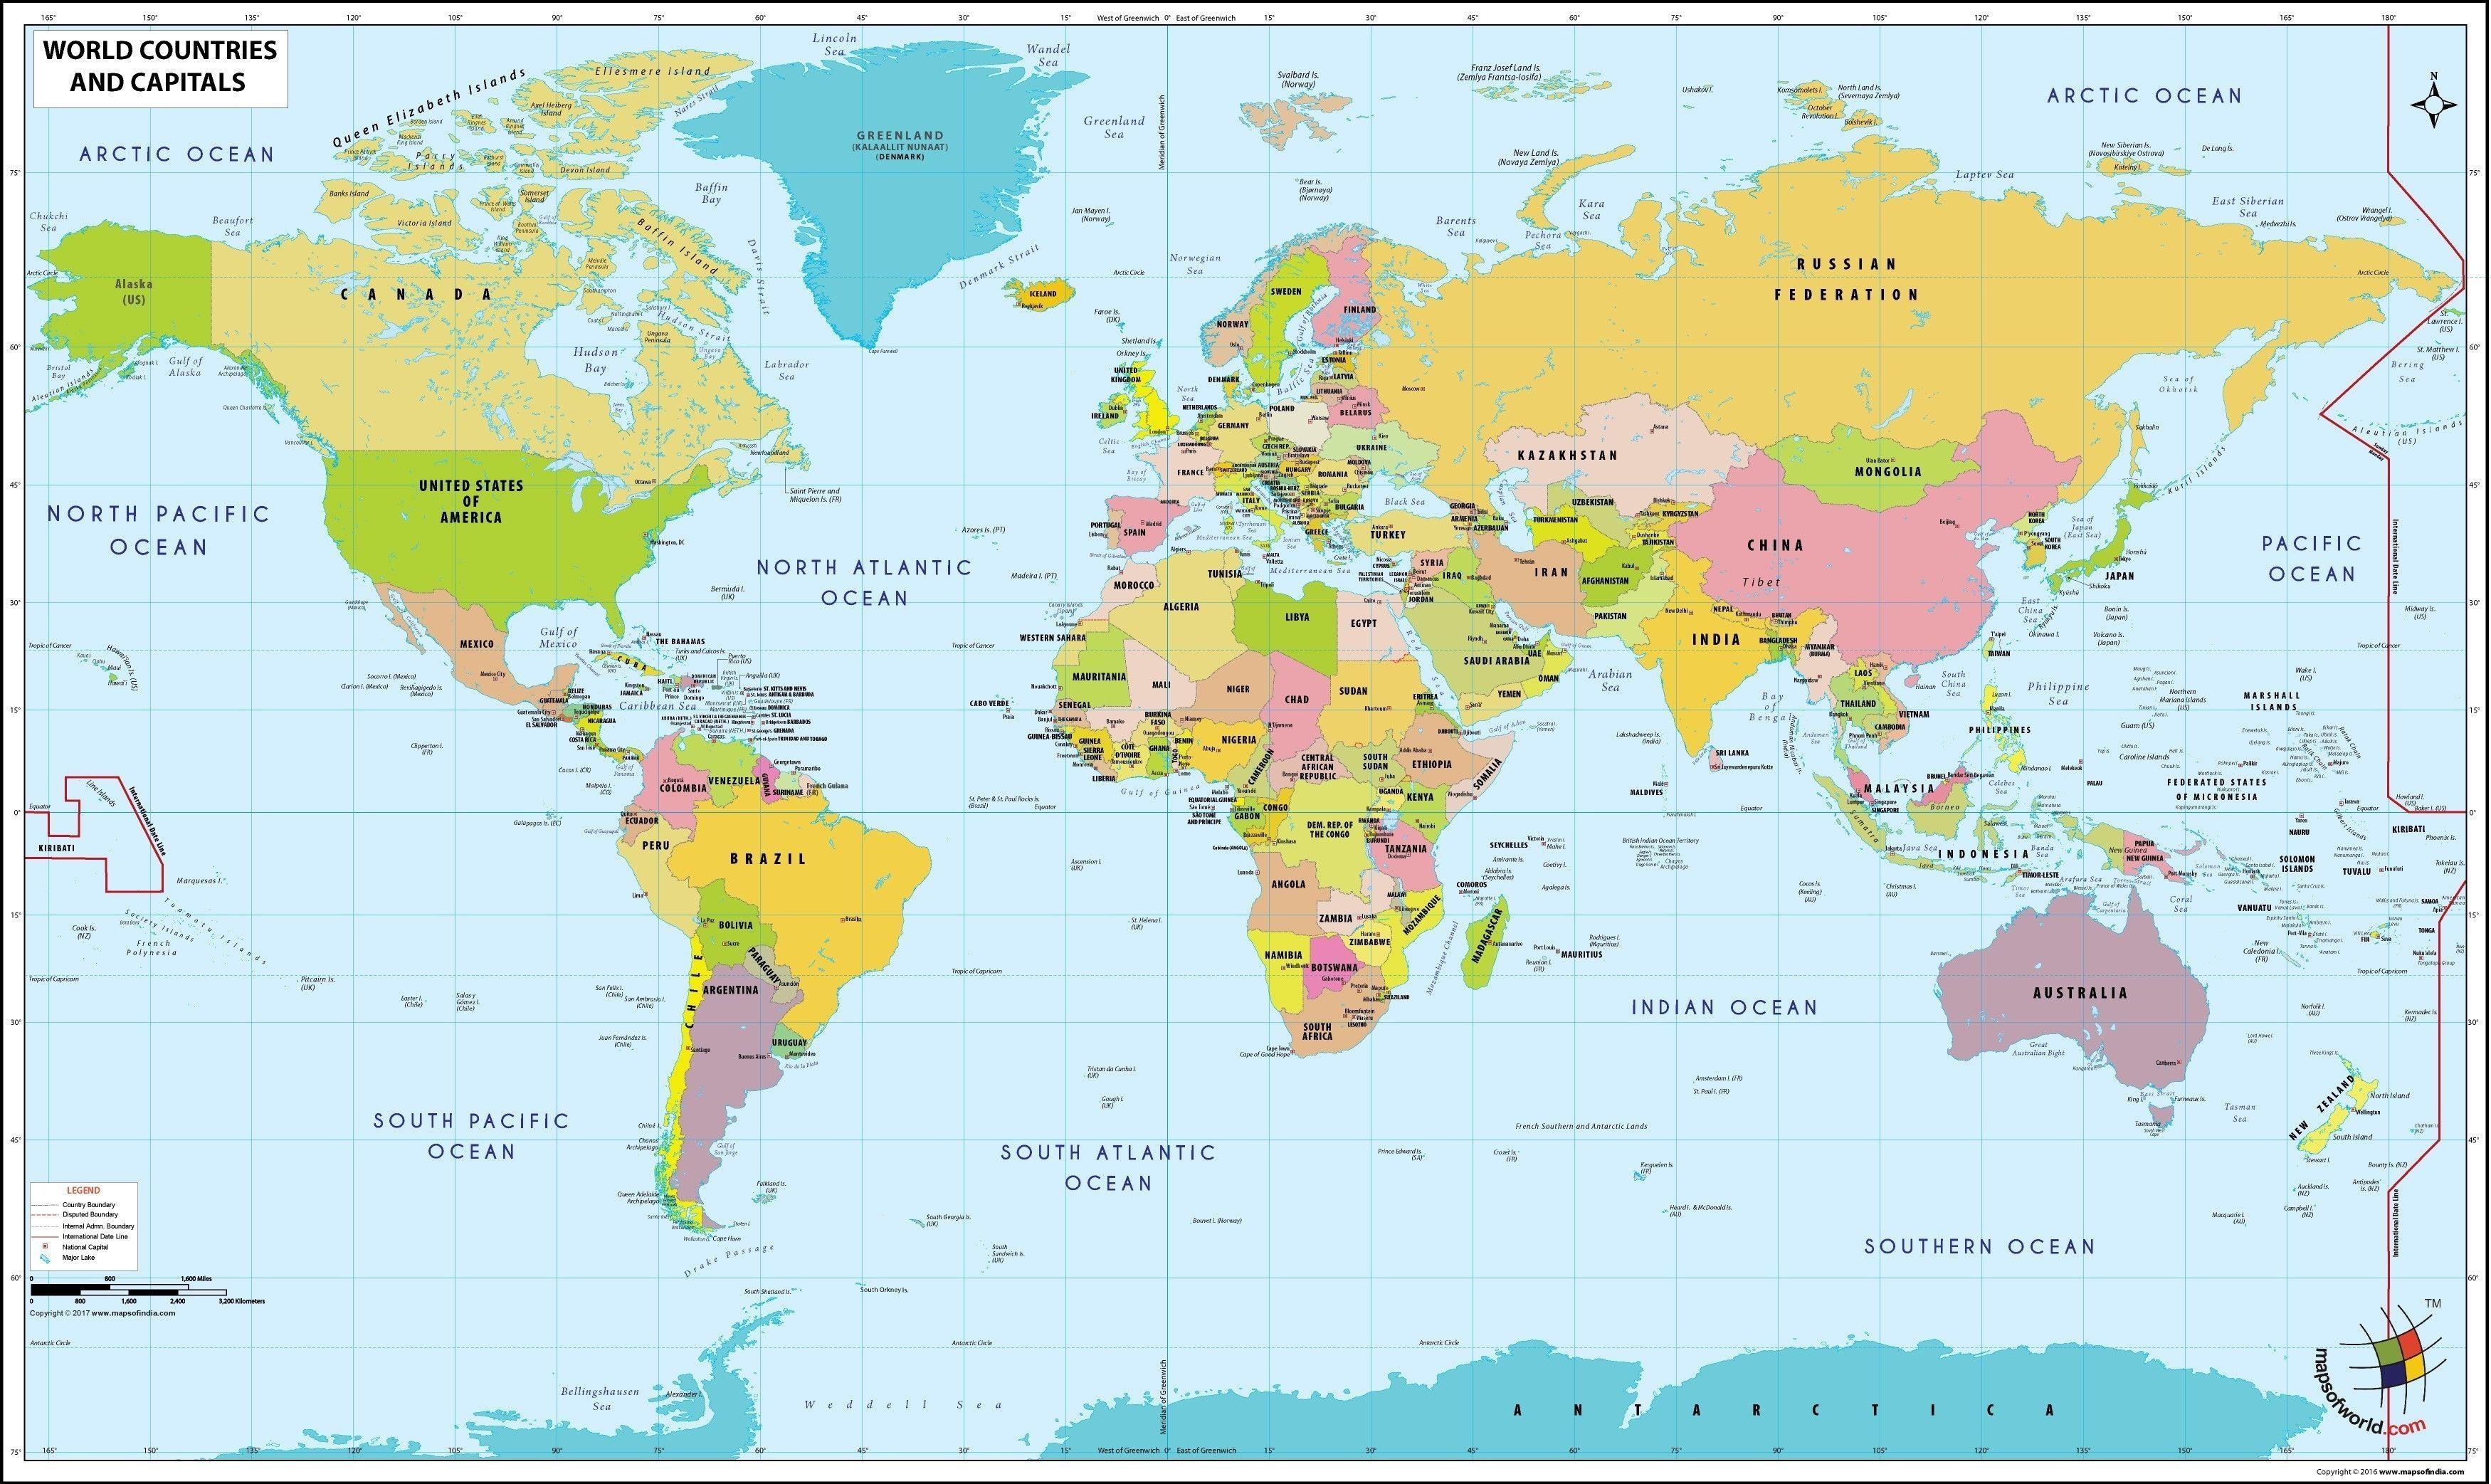 World Political MAP Wallpapers - Top Free World Political MAP ...